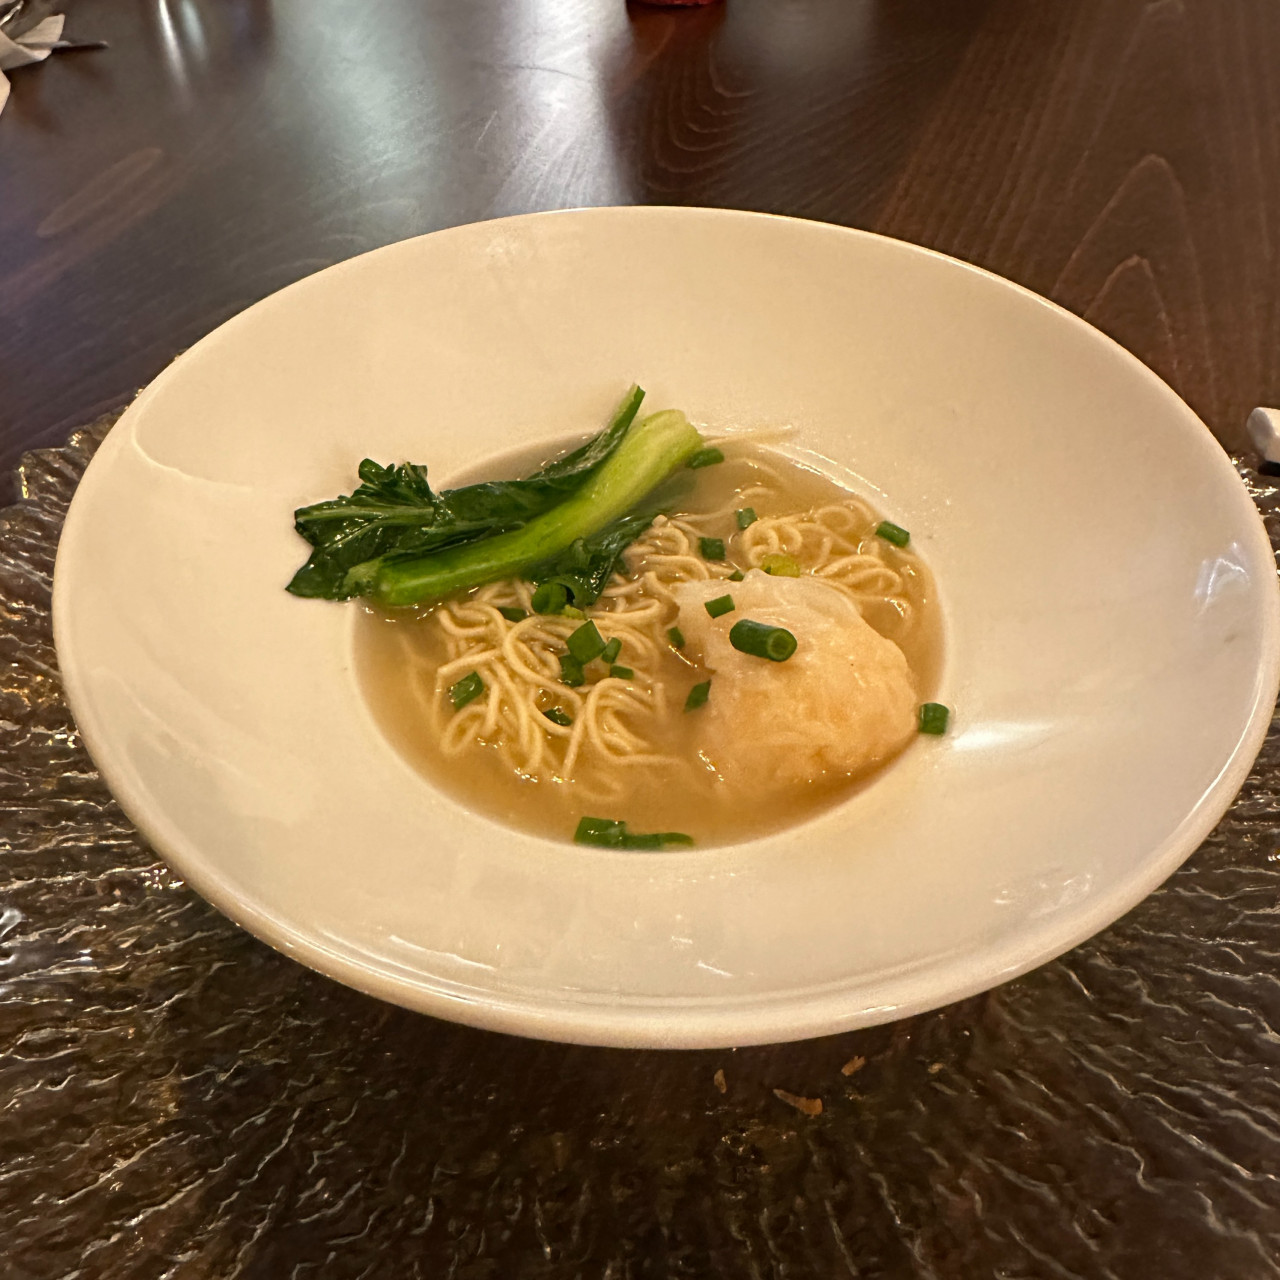  You can tell every component of this dish has been worked on, yet it feels light and easy. The noodles have the right bite, and the soup is deeply flavourful. – Haikal Fernandez pic